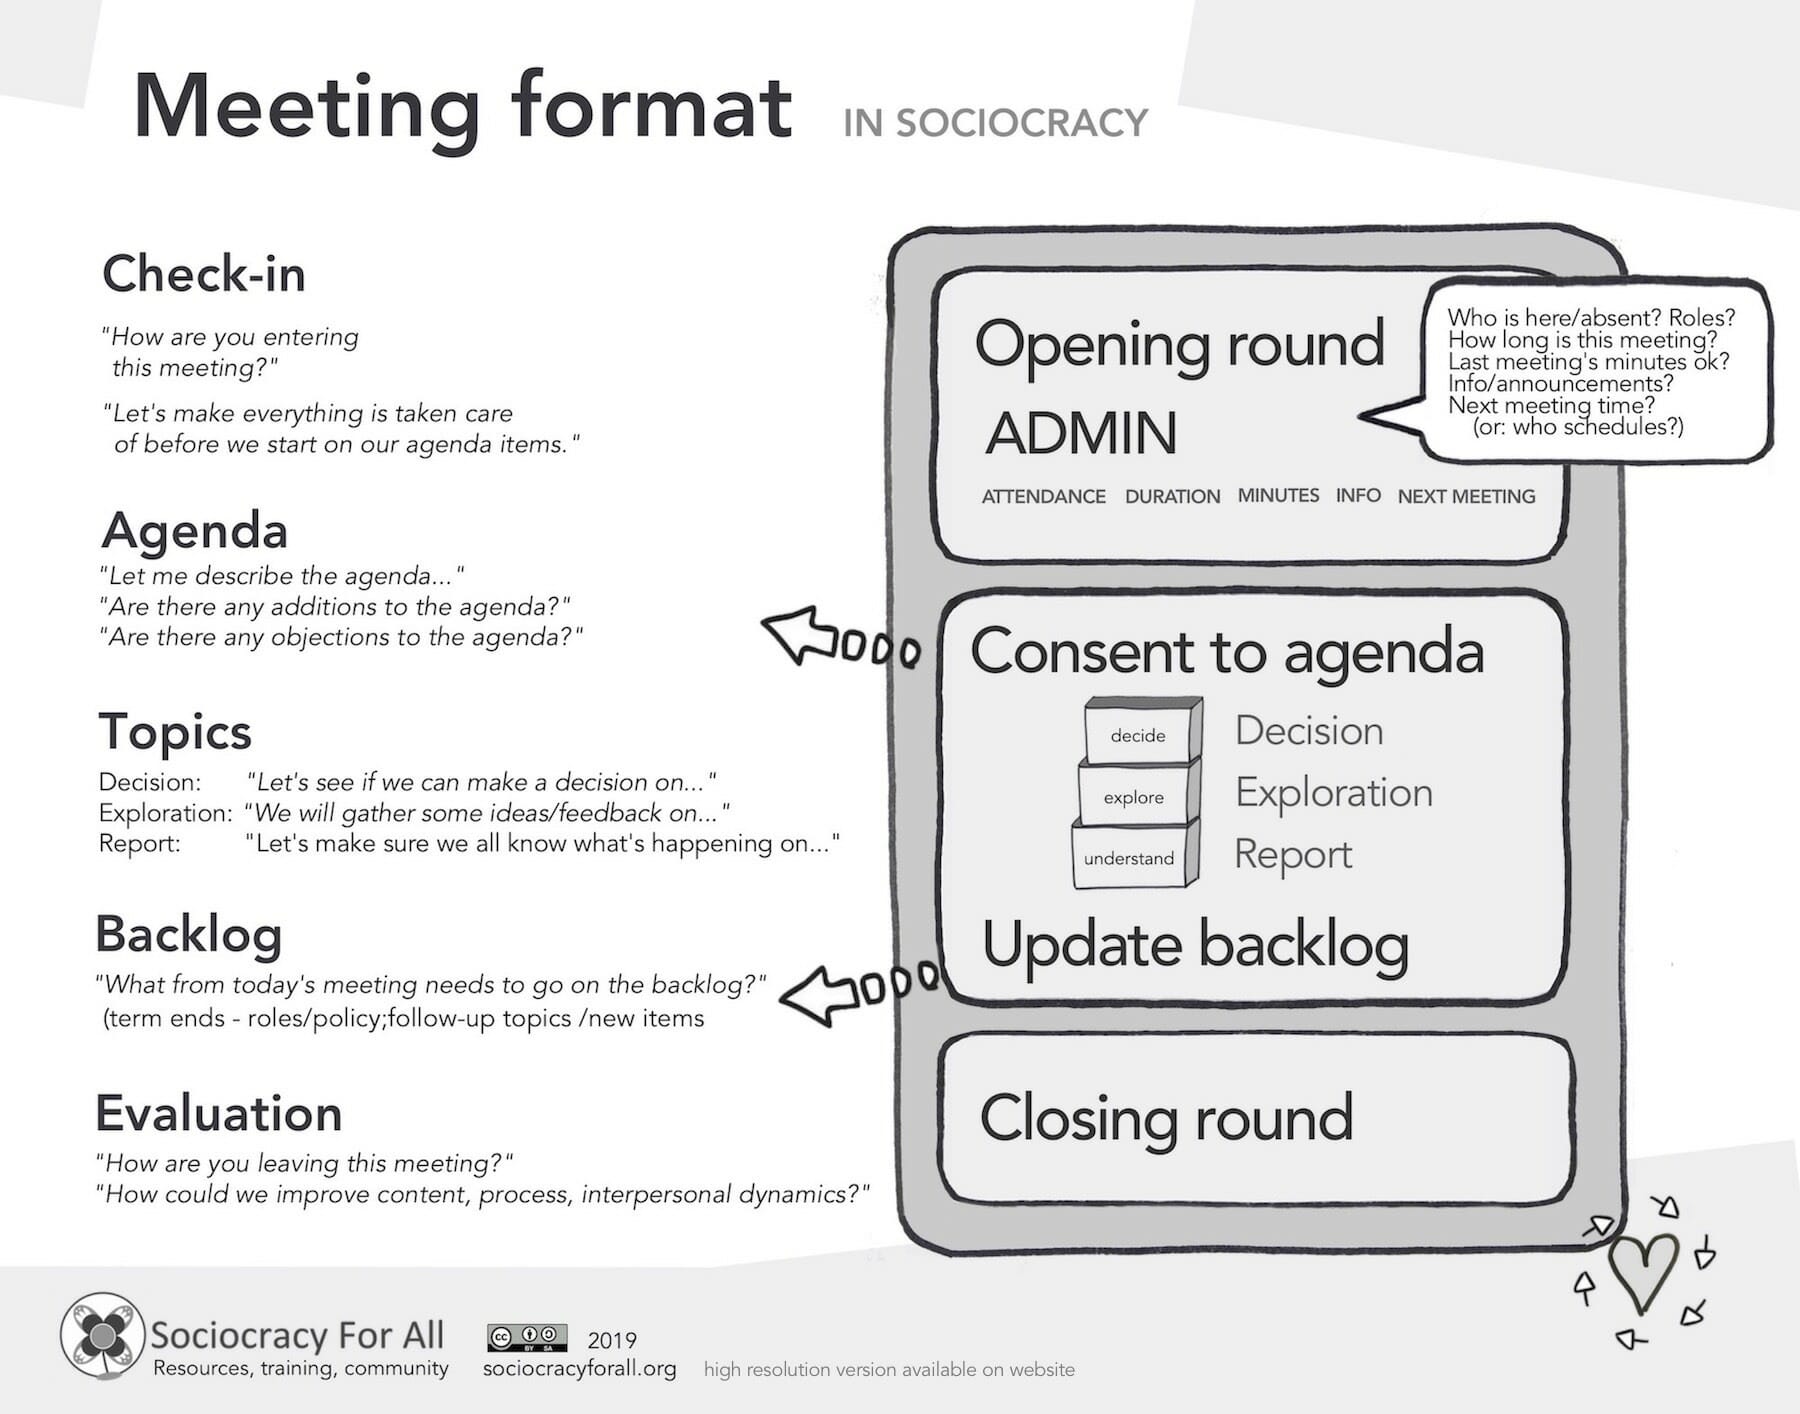 Image of downloadable poster with the standard meeting format in sociocracy. Includes check-in, admin items, agenda topics, backlog, and meeting evaluation.